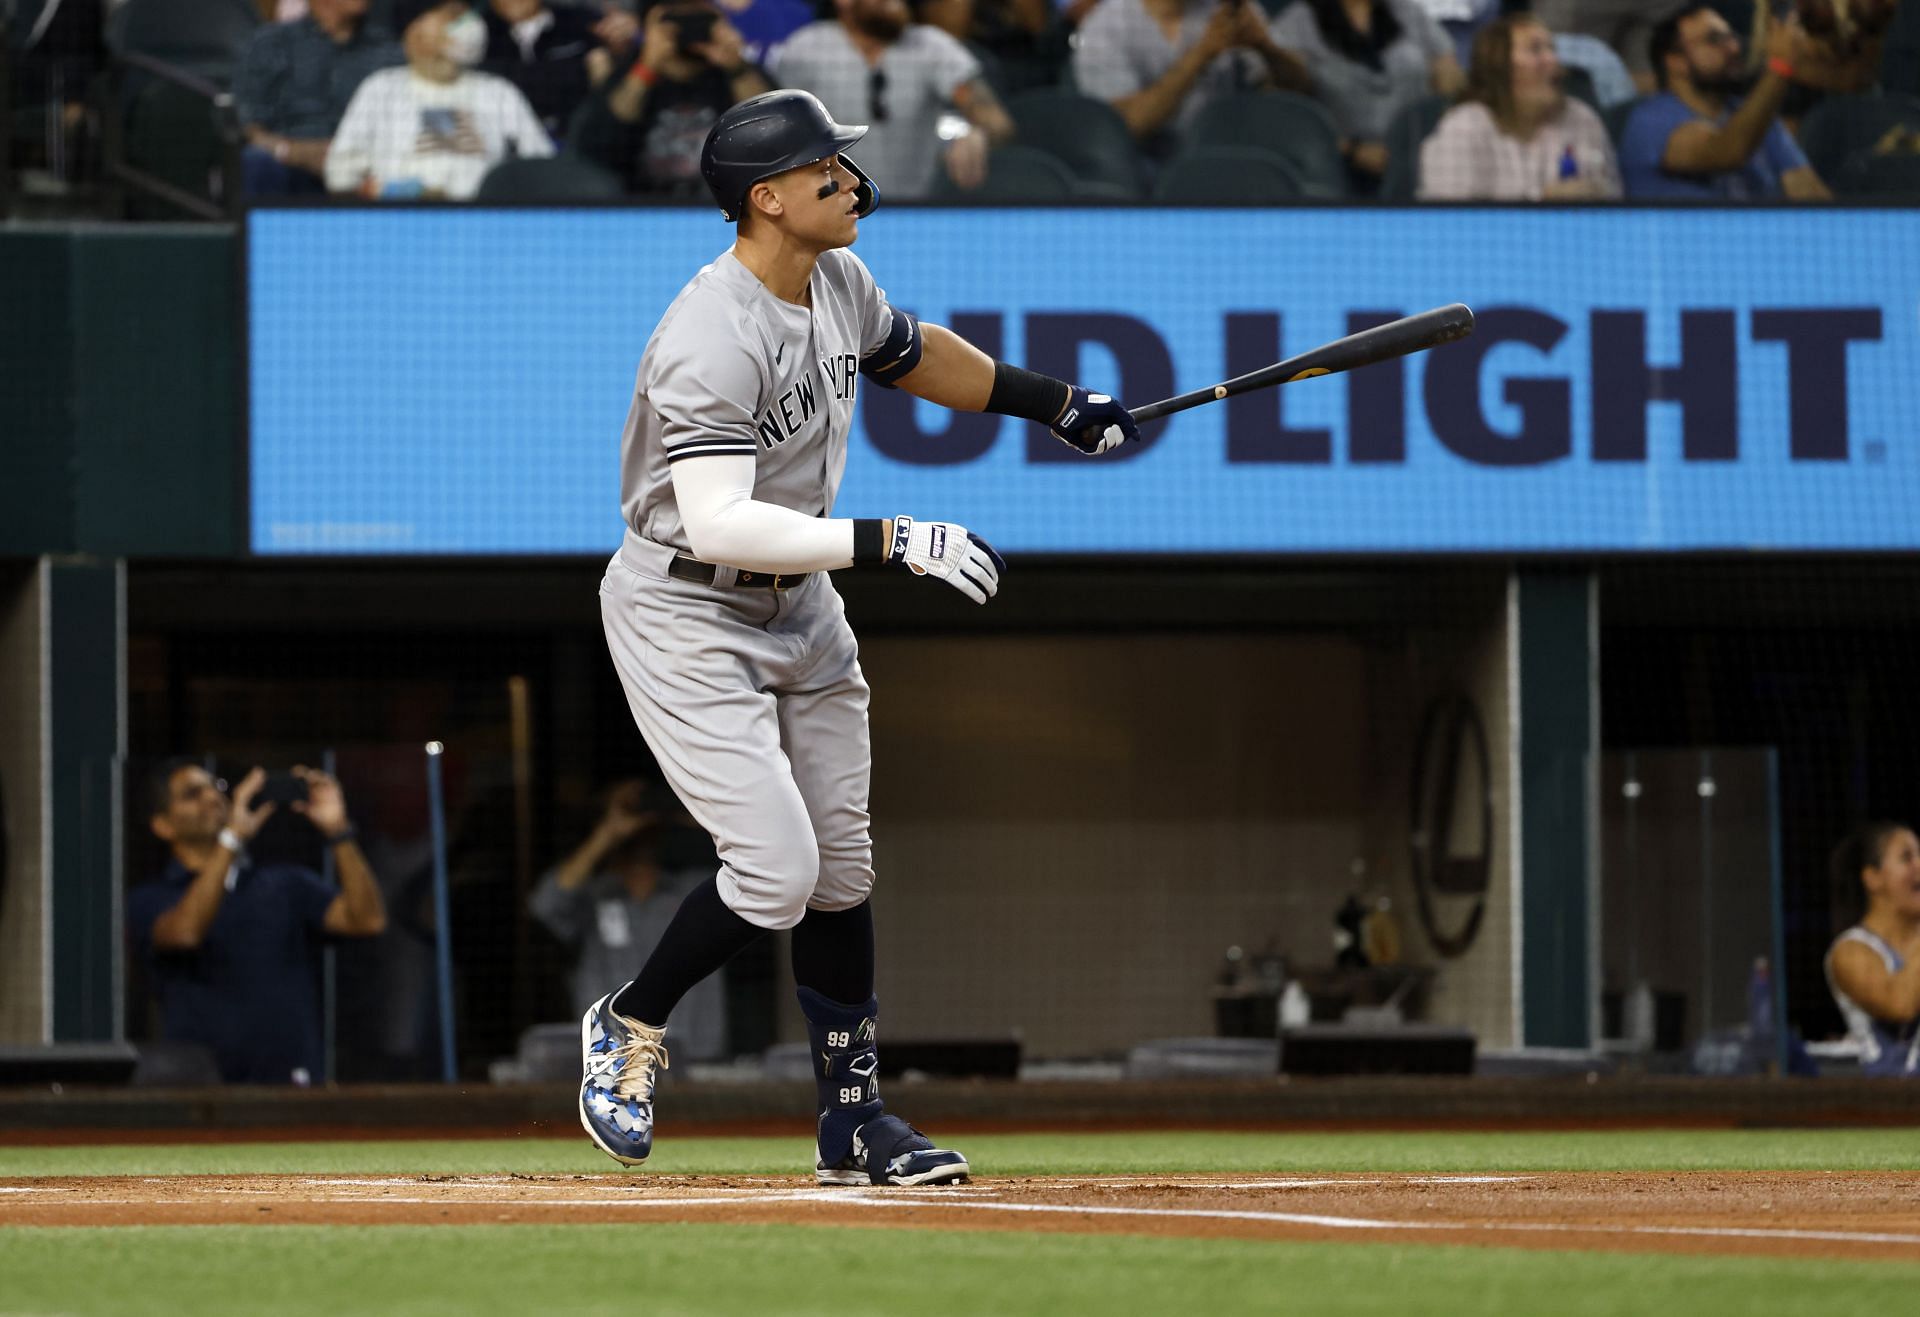 Estimated value of Aaron Judge's 62nd home run ball with Yankees, revealed